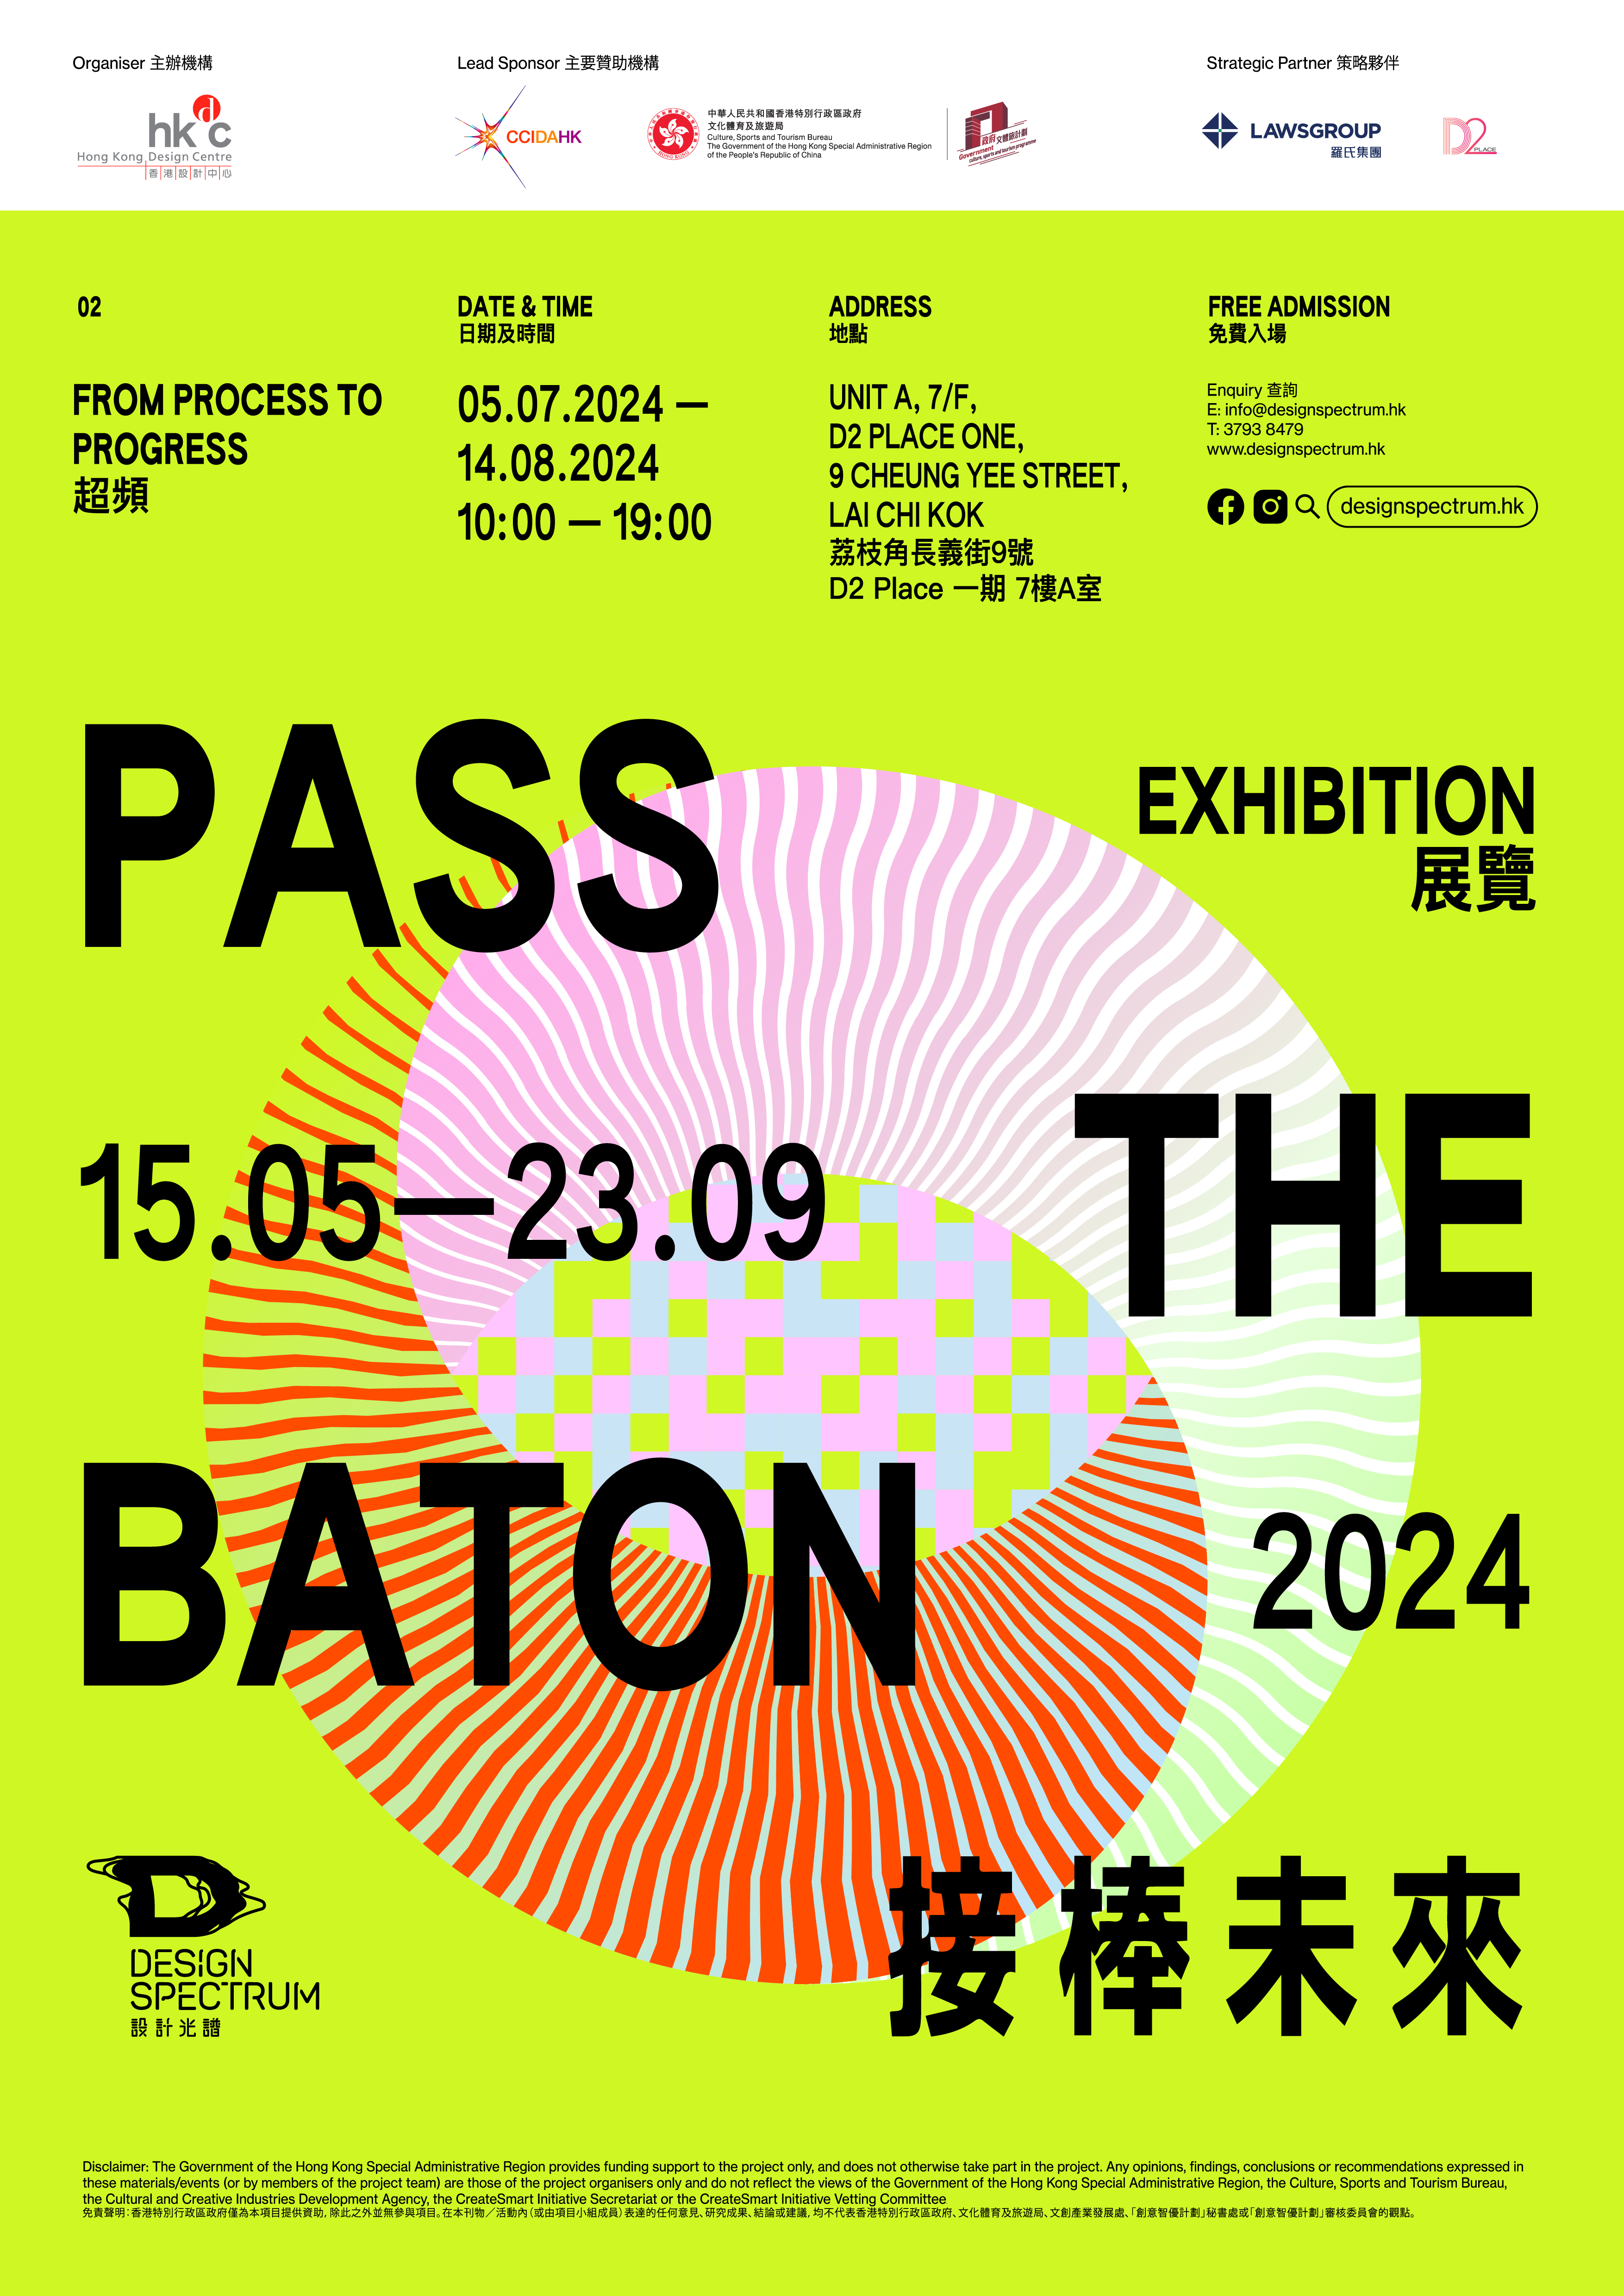 Design Spectrum of Hong Kong Design Centre Presents: ‘PASS THE BATON’ Exhibition Part 2 ‘FROM PROCESS TO PROGRESS’ Continues the Journey of Inheritance